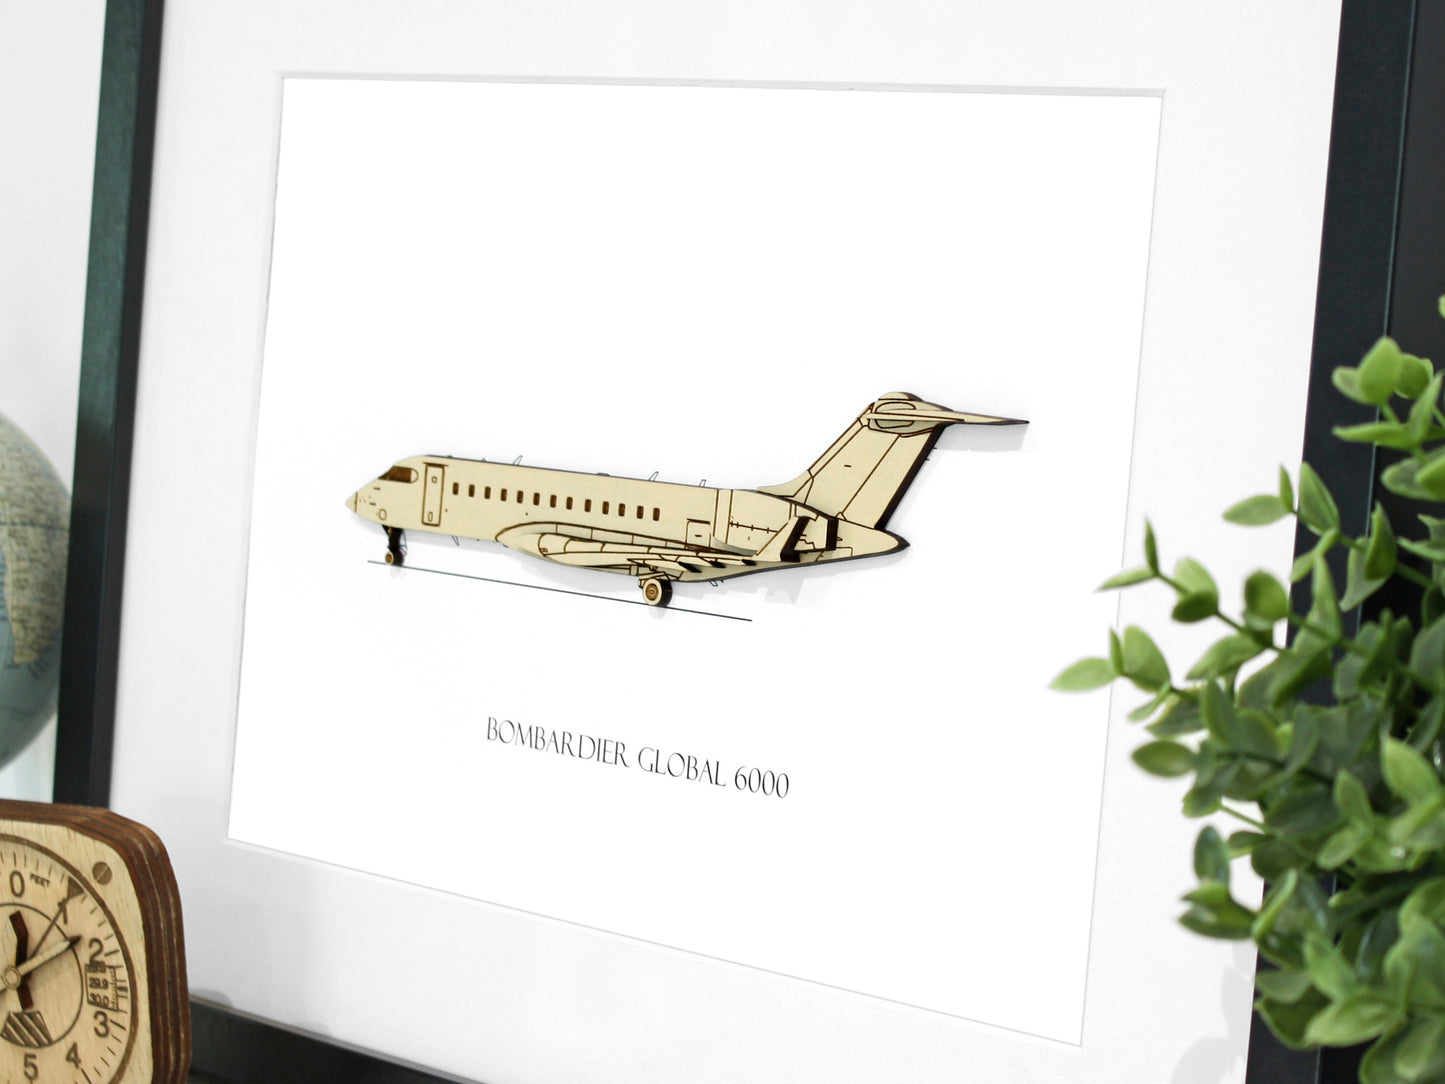 Bombardier Global 6000 aircraft gifts